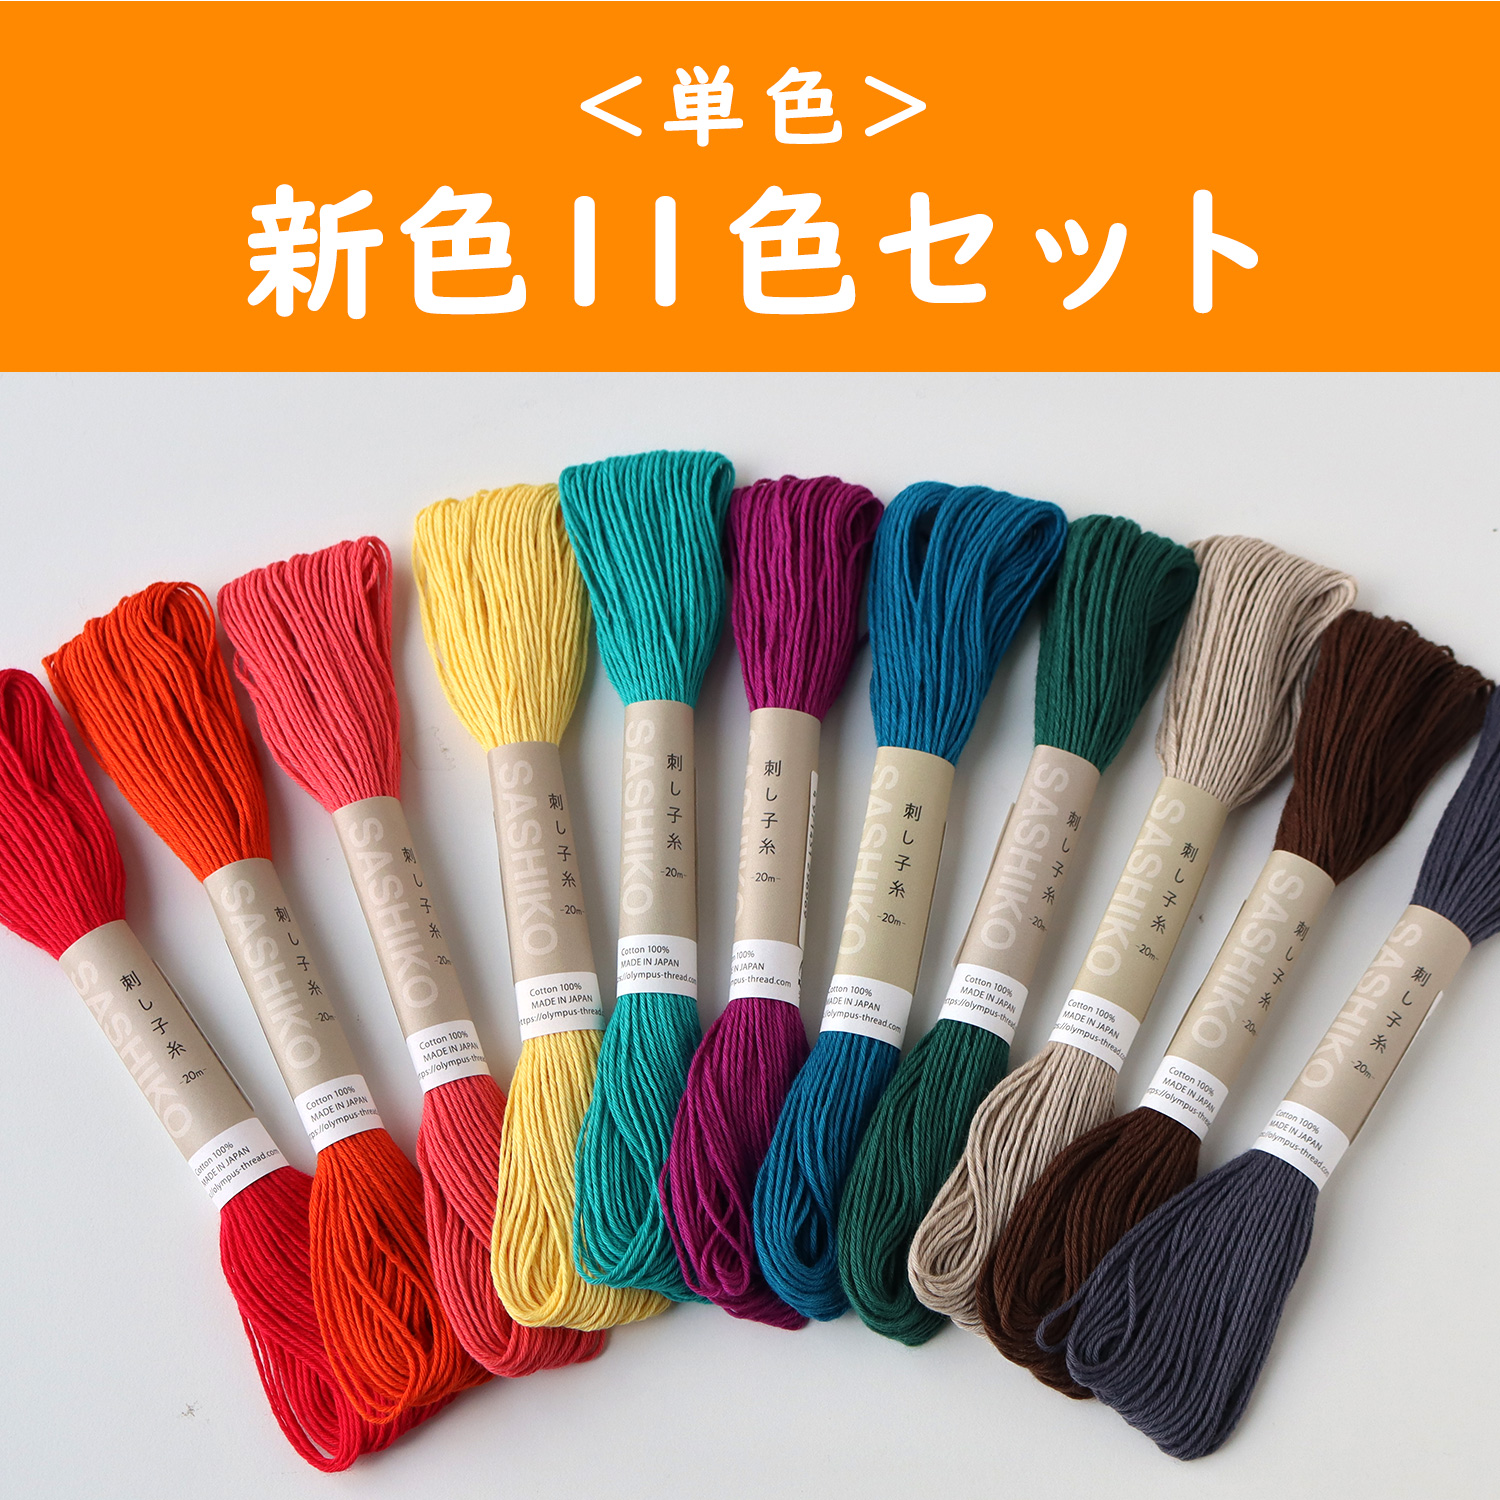 OS-20M-N11SET Olympus SASHIKO Embroidery Thread [Single color] Set of 11 new colors, 1color/pack 20m (set)